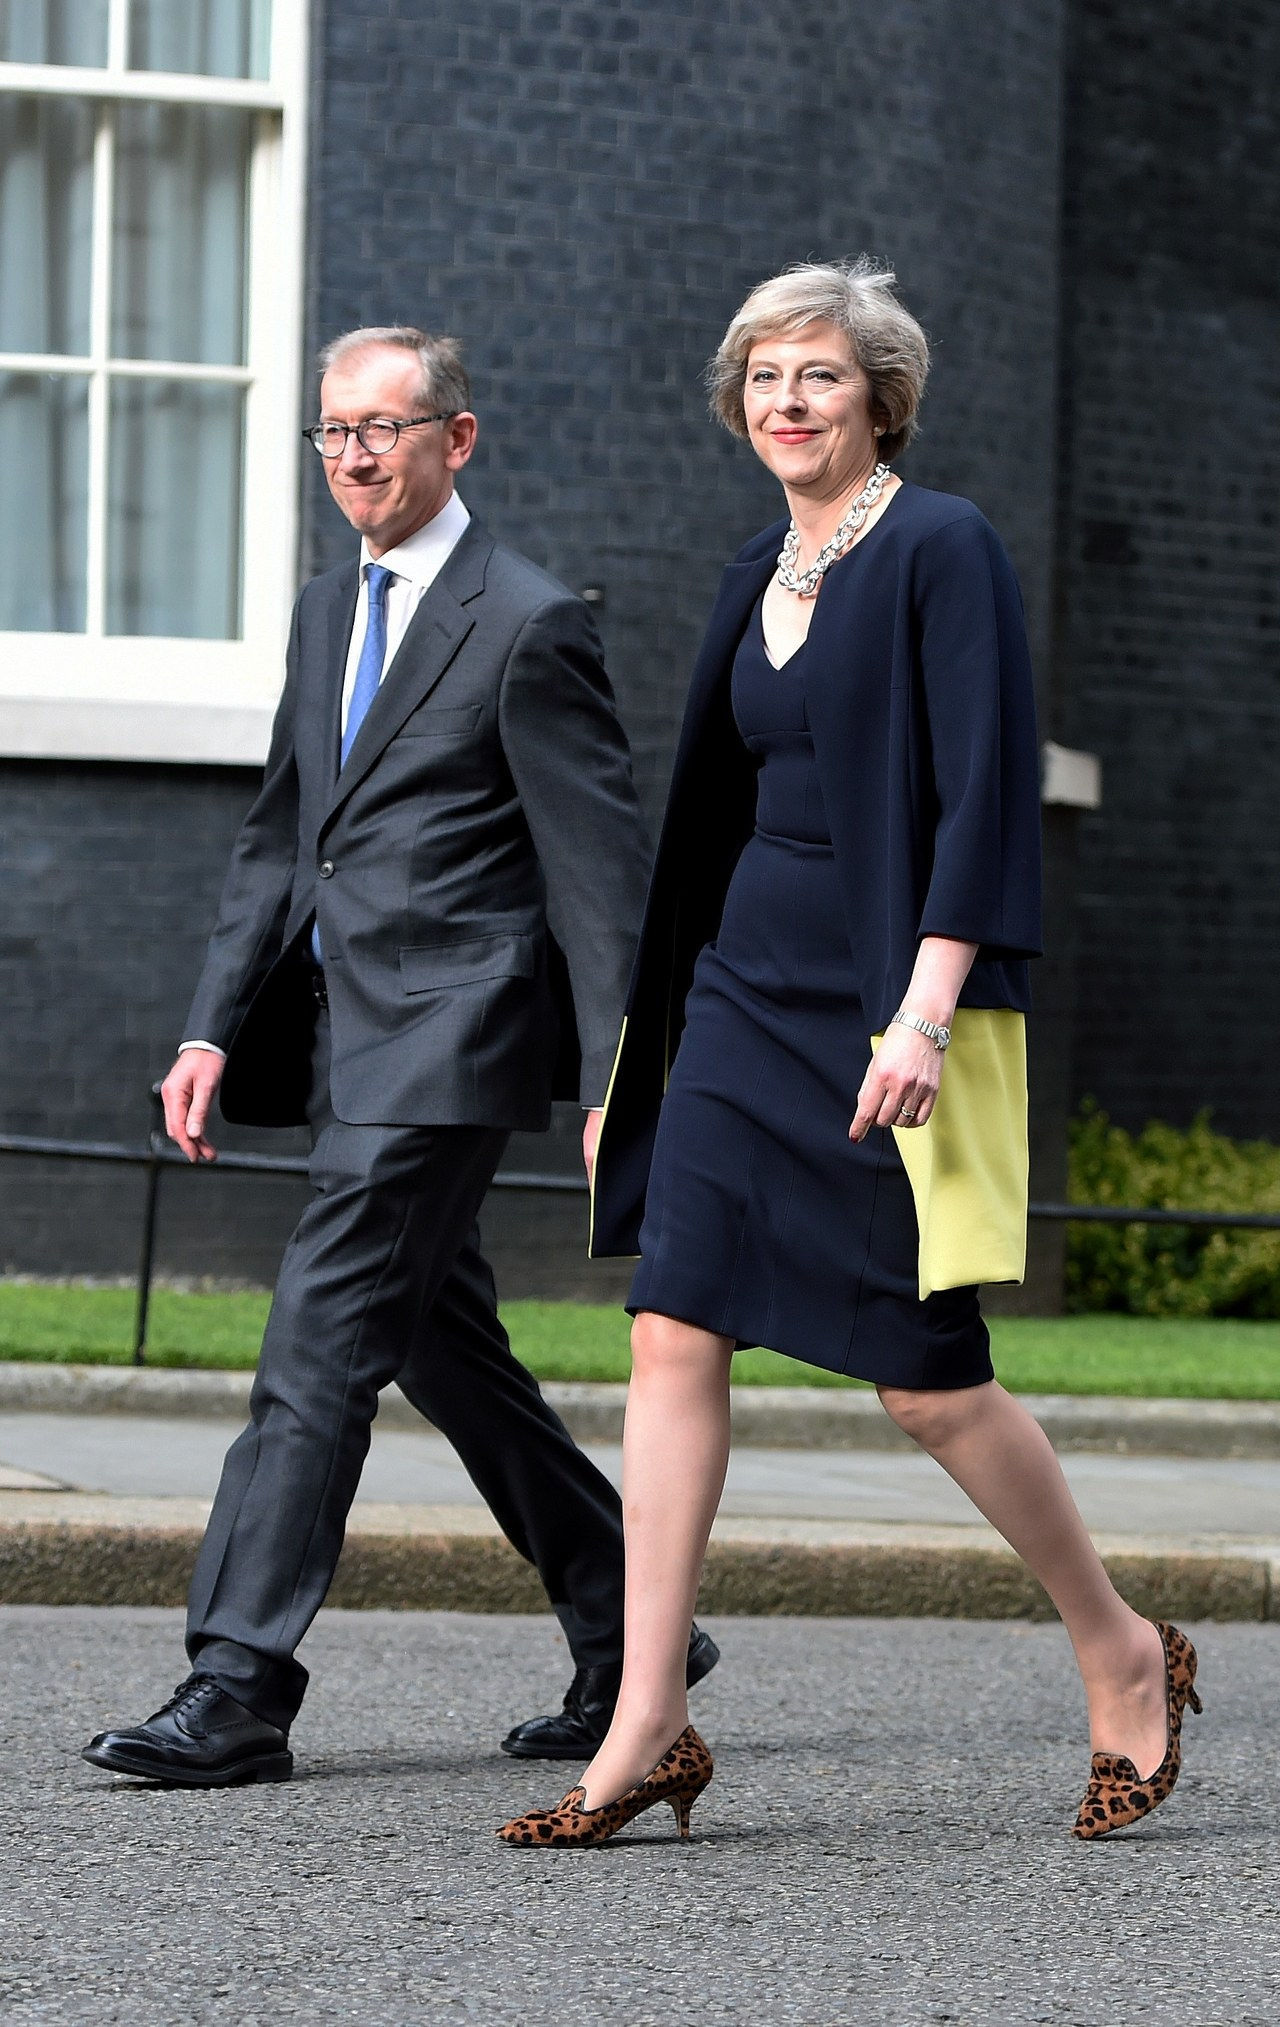 LONDON، UNITED KINGDOM - JULY 13: British Prime Minister Theresa May (R) and husband Philip May arrive at the 10 Downing Street on July 13, 2016 in London, England. Former Home Secretary Theresa May becomes the UK's second female Prime Minister after she was selected unopposed by Conservative MPs to be their new party leader. She is currently MP for Maidenhead. (Photo by Kate Green/Anadolu Agency/Getty Images)